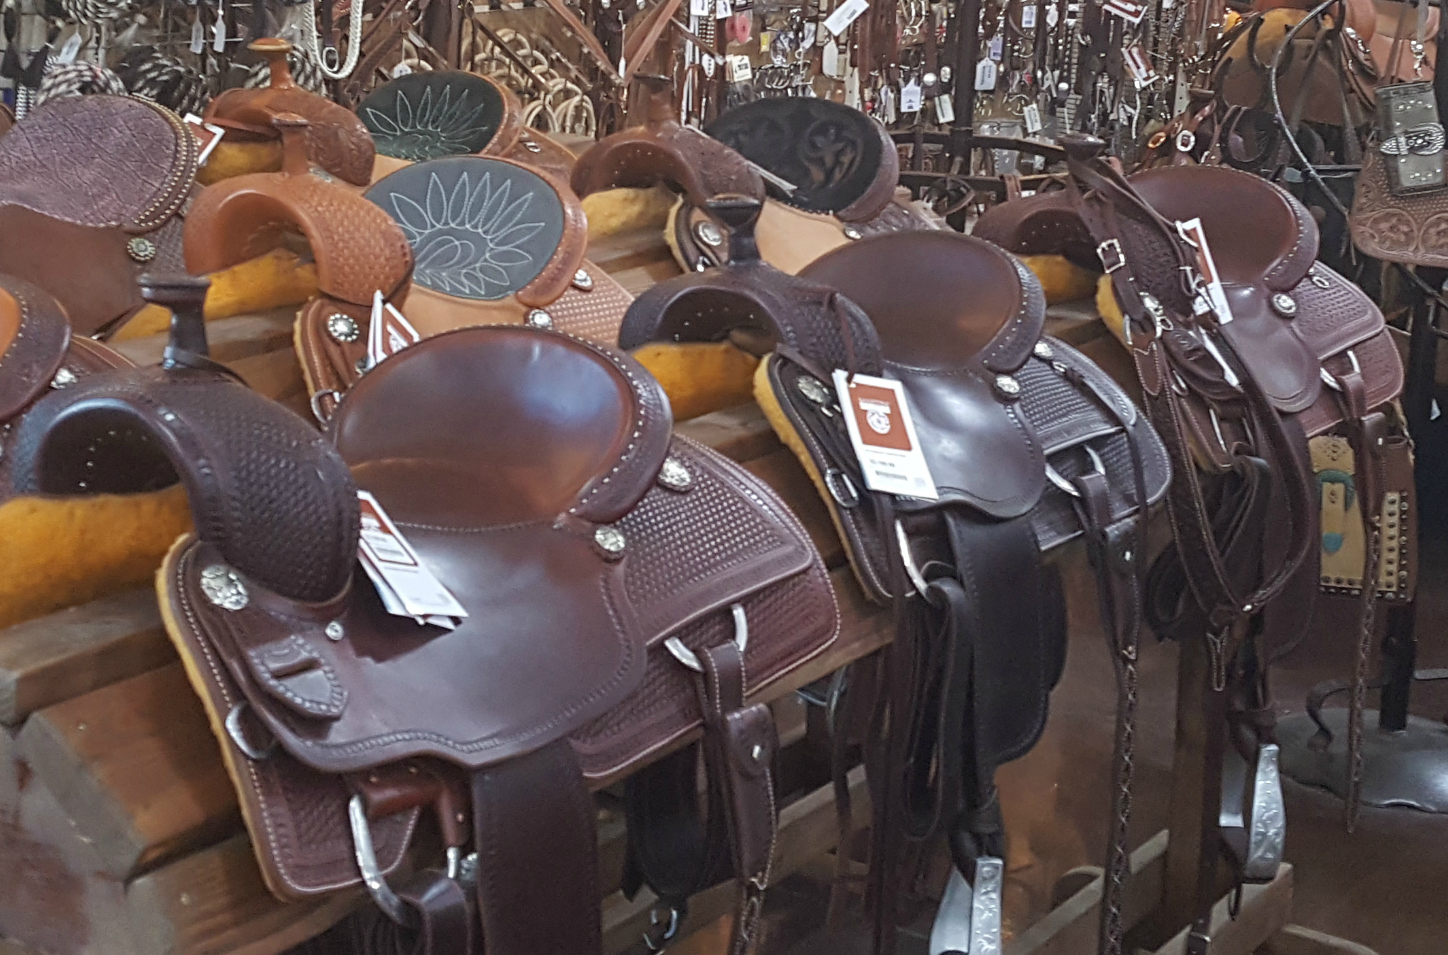 New Saddles at Legacy Feed and Fuel